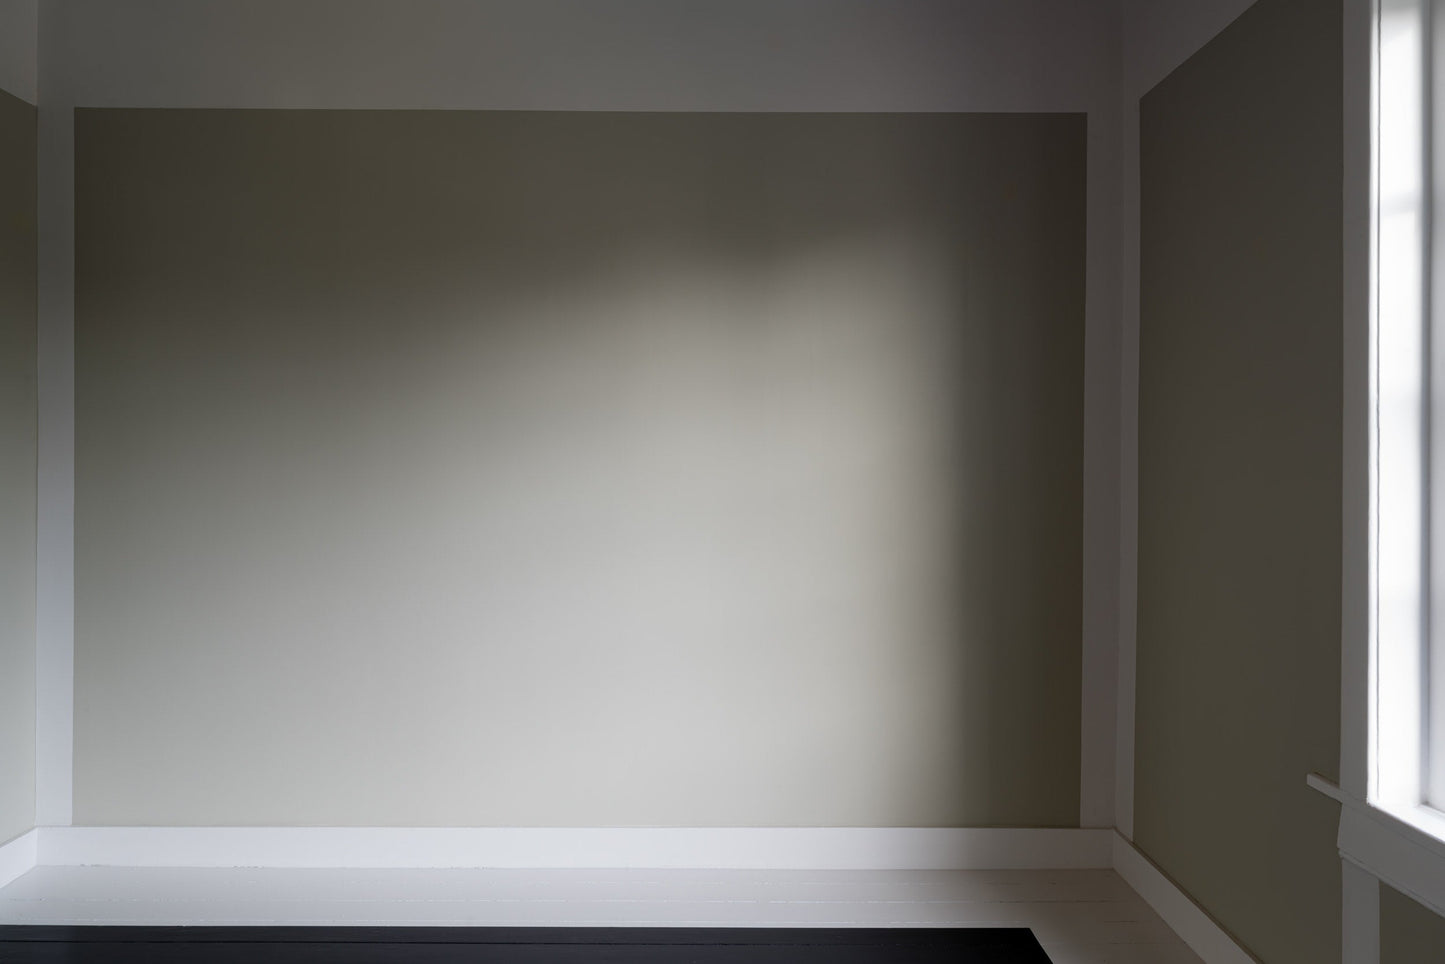 The artwork 'Van Doesburg-Rinsemahuis #8' by J.T. Hof displaying a composition of 2 grey walls with straight white lines